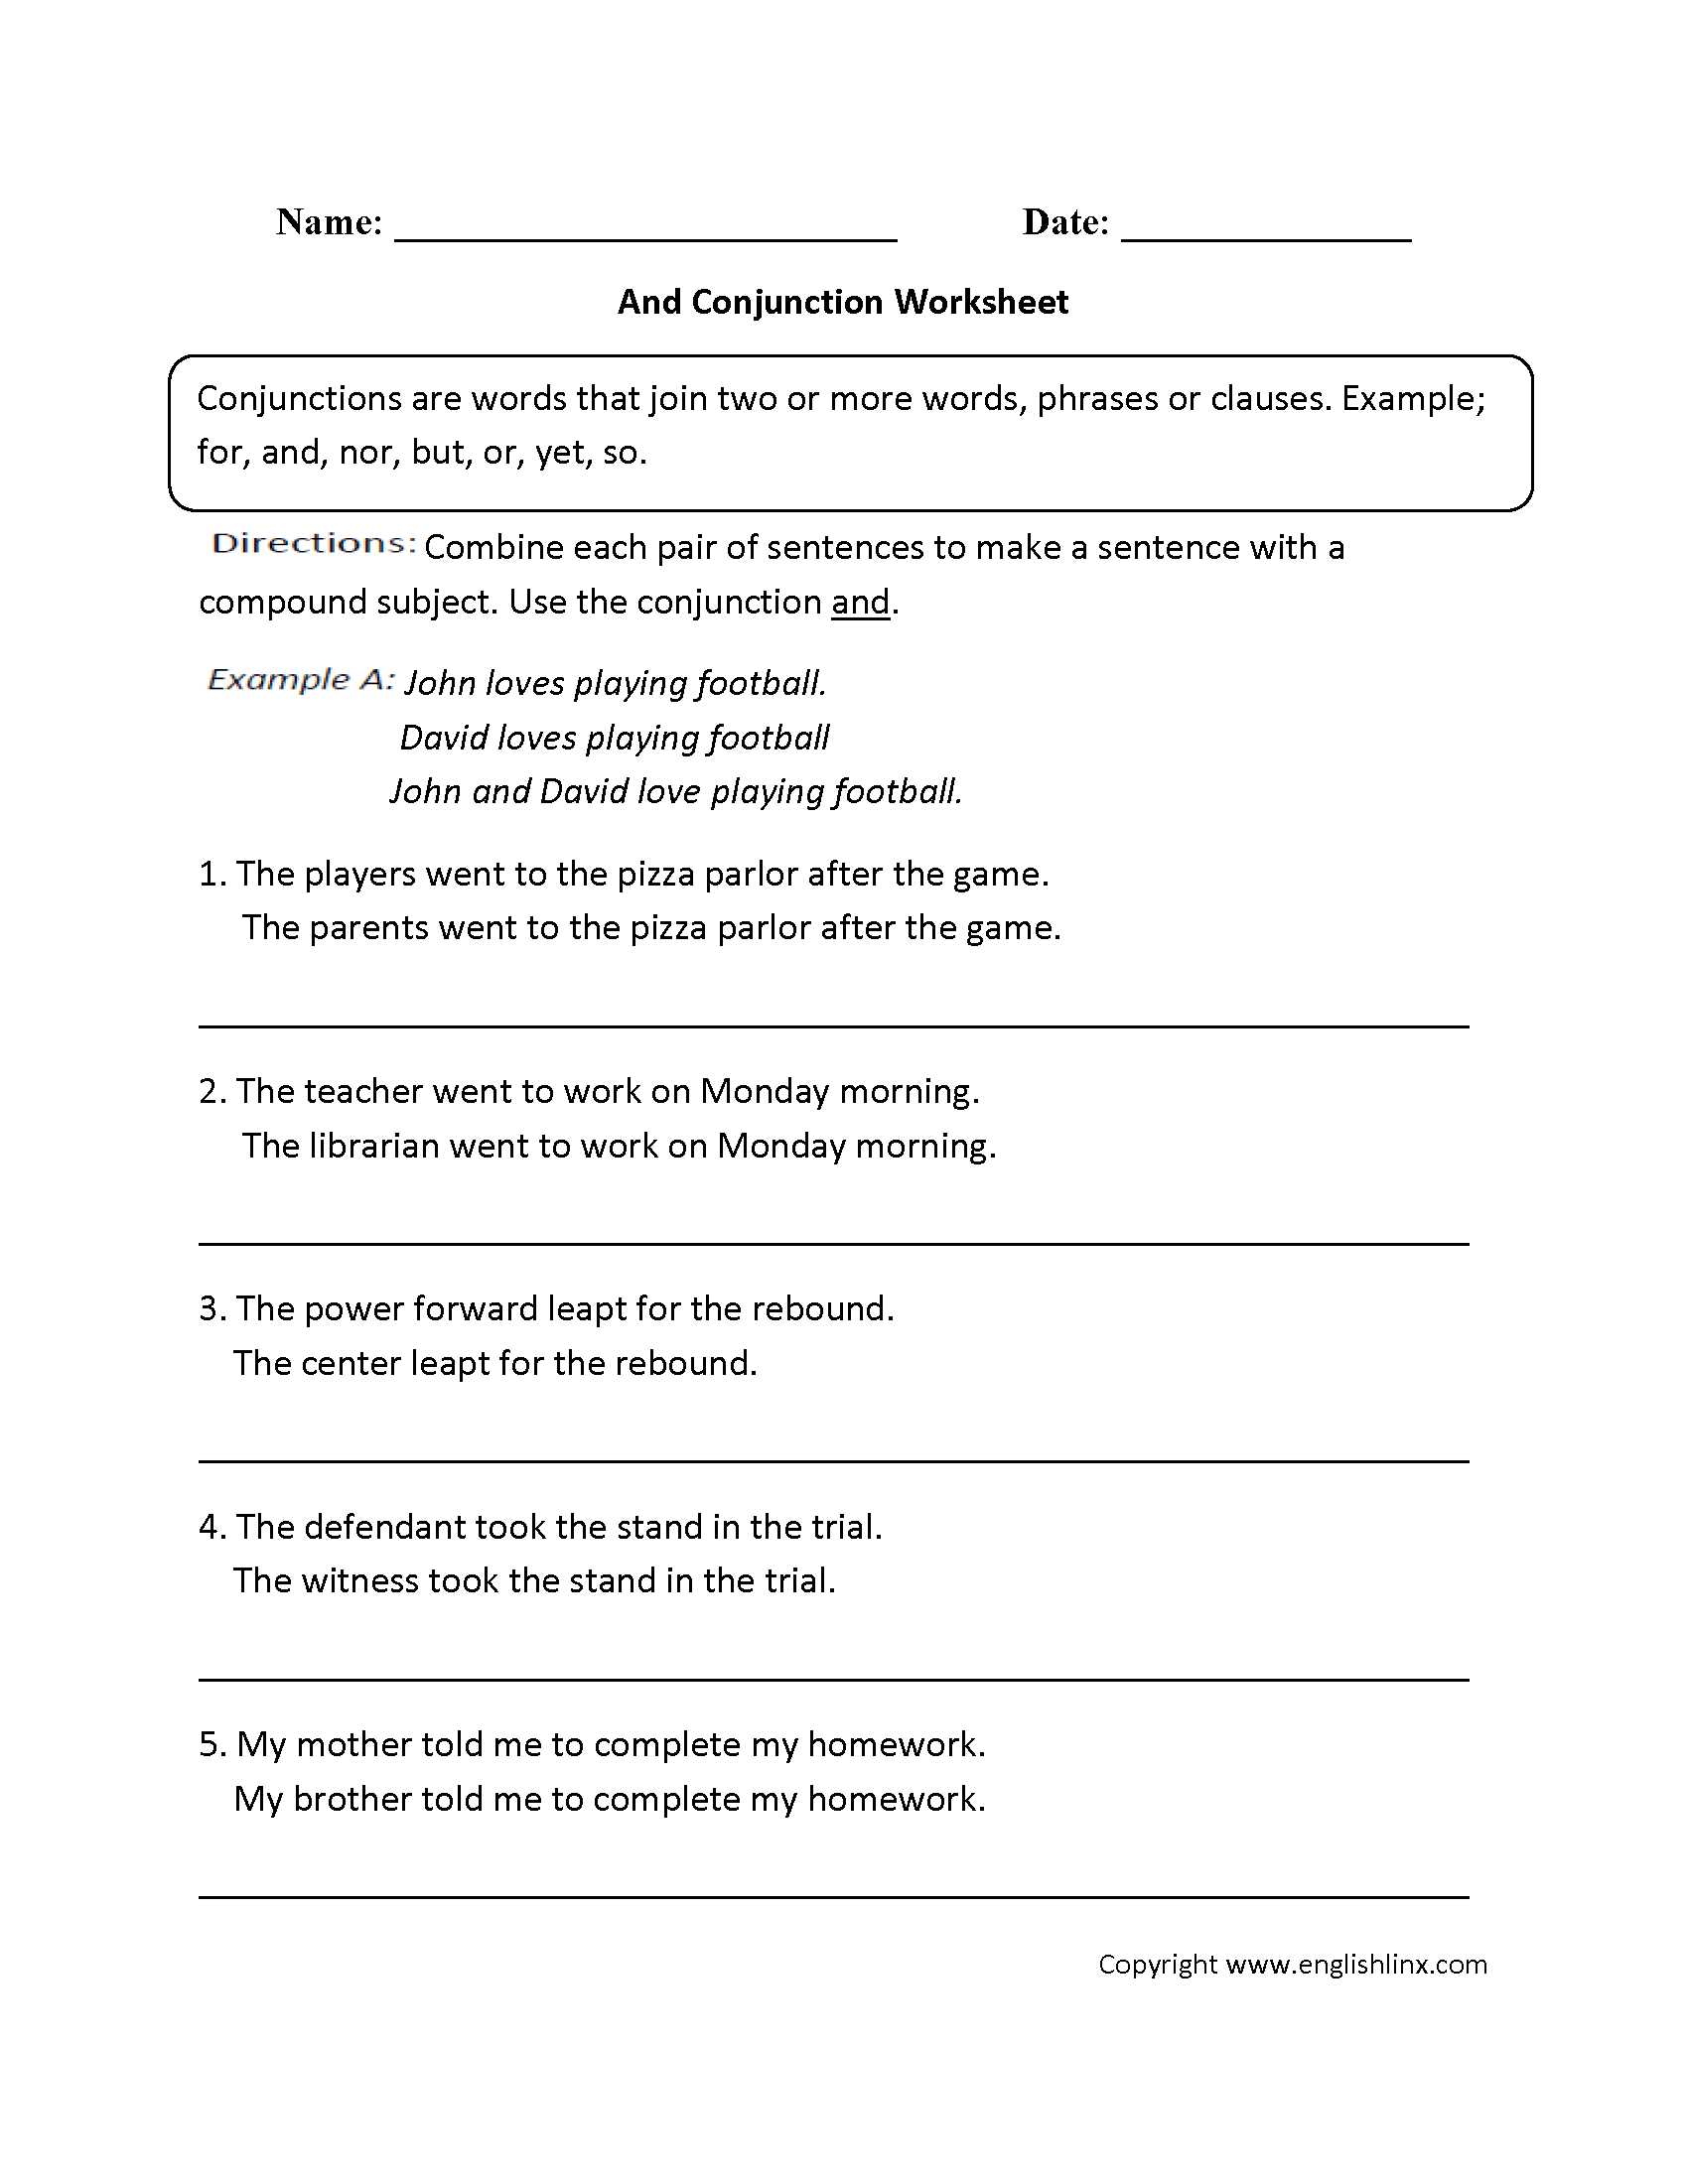 Identifying Parts Of Speech Worksheet as Well as Free Parts Speech Worksheets the Best Worksheets Image Collection